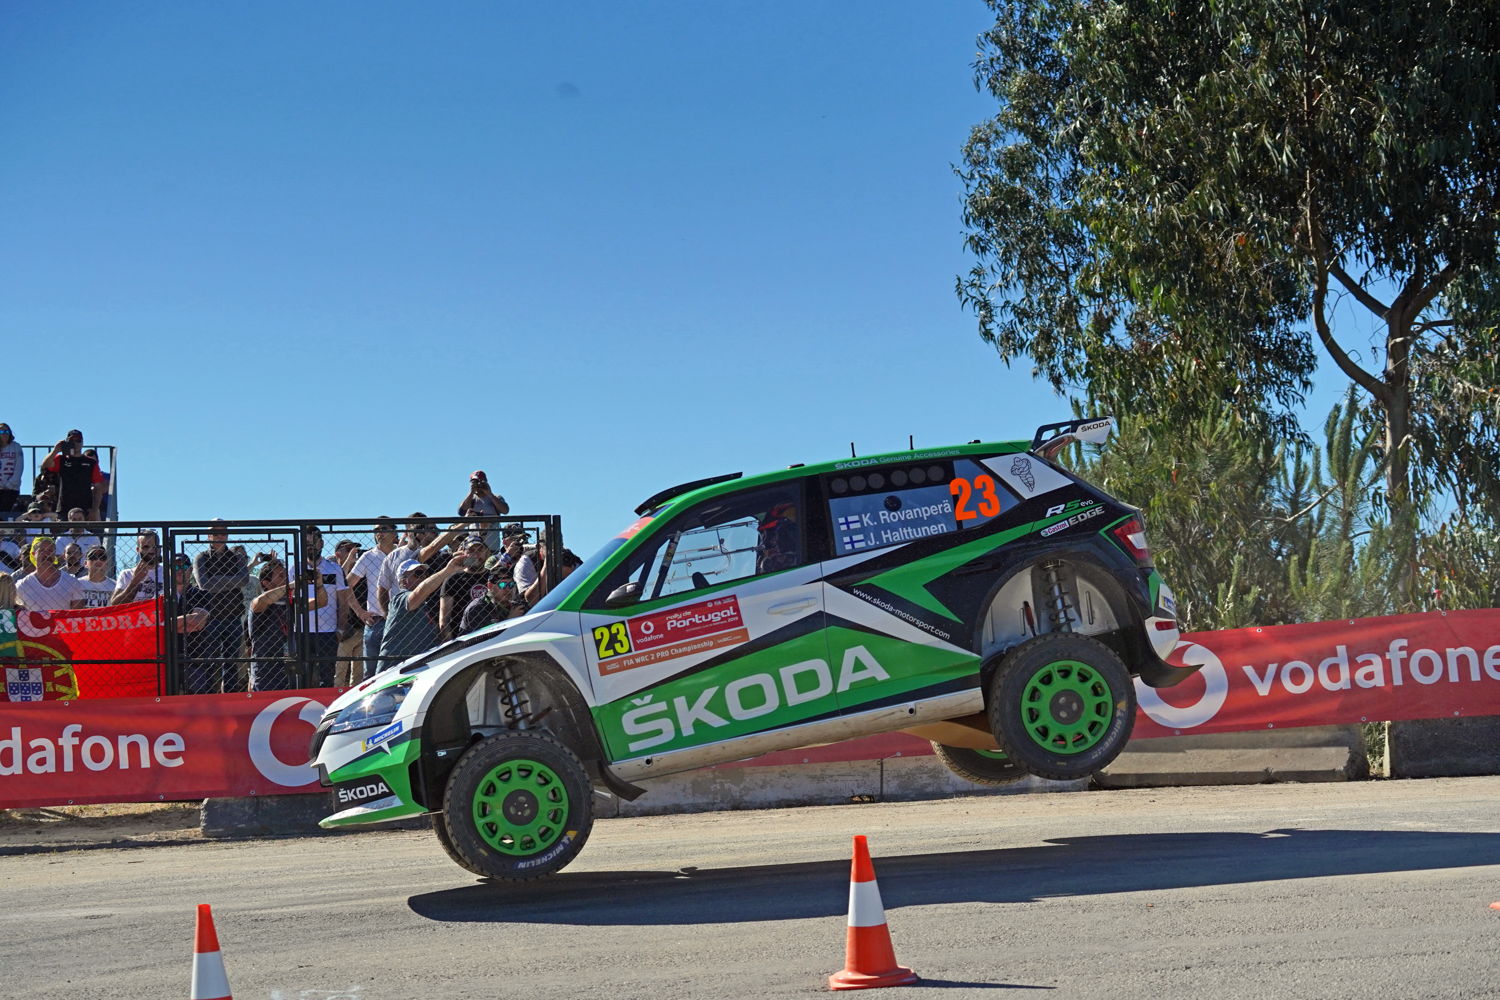 At the tenth round of the FIA World Rally Championship 2019, ŠKODA works crew and WRC 2 Pro category leaders Kalle Rovanperä and Jonne Halttunen (ŠKODA FABIA R5 evo) aim for their fifth category win in a row